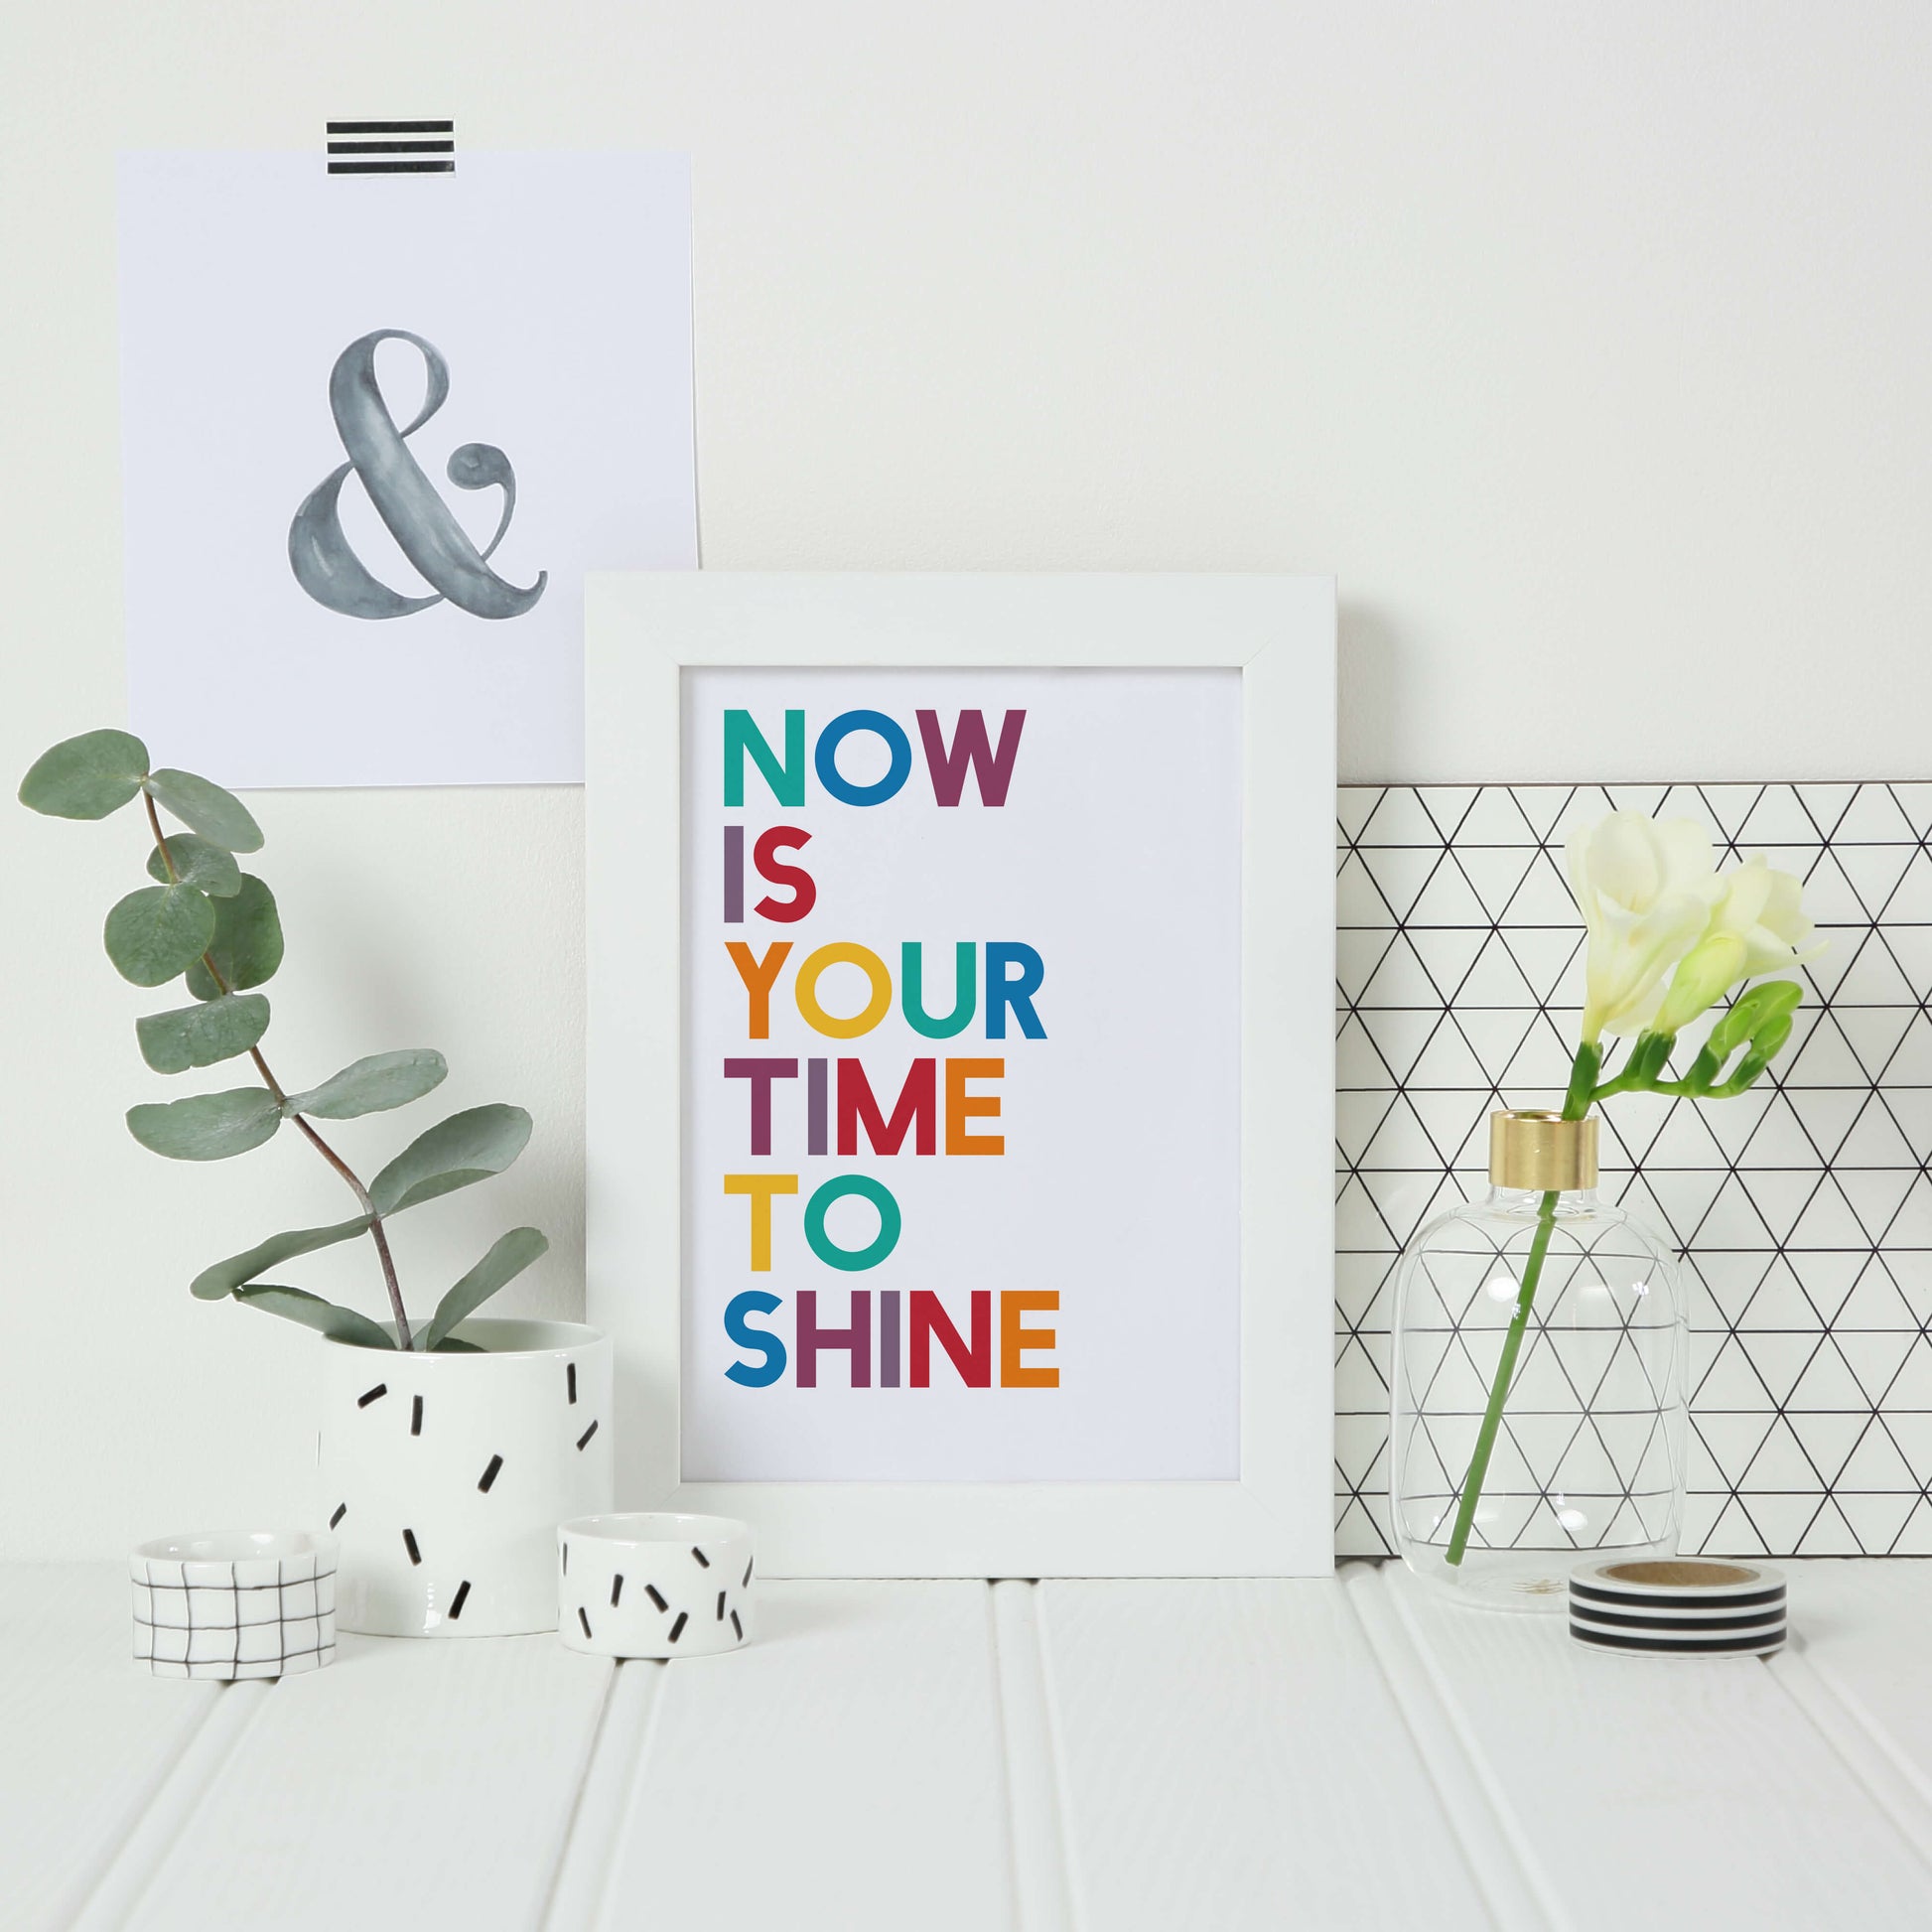 Now Is Your Time To Shine Print by SixElevenCreations. Product Code SEP0211